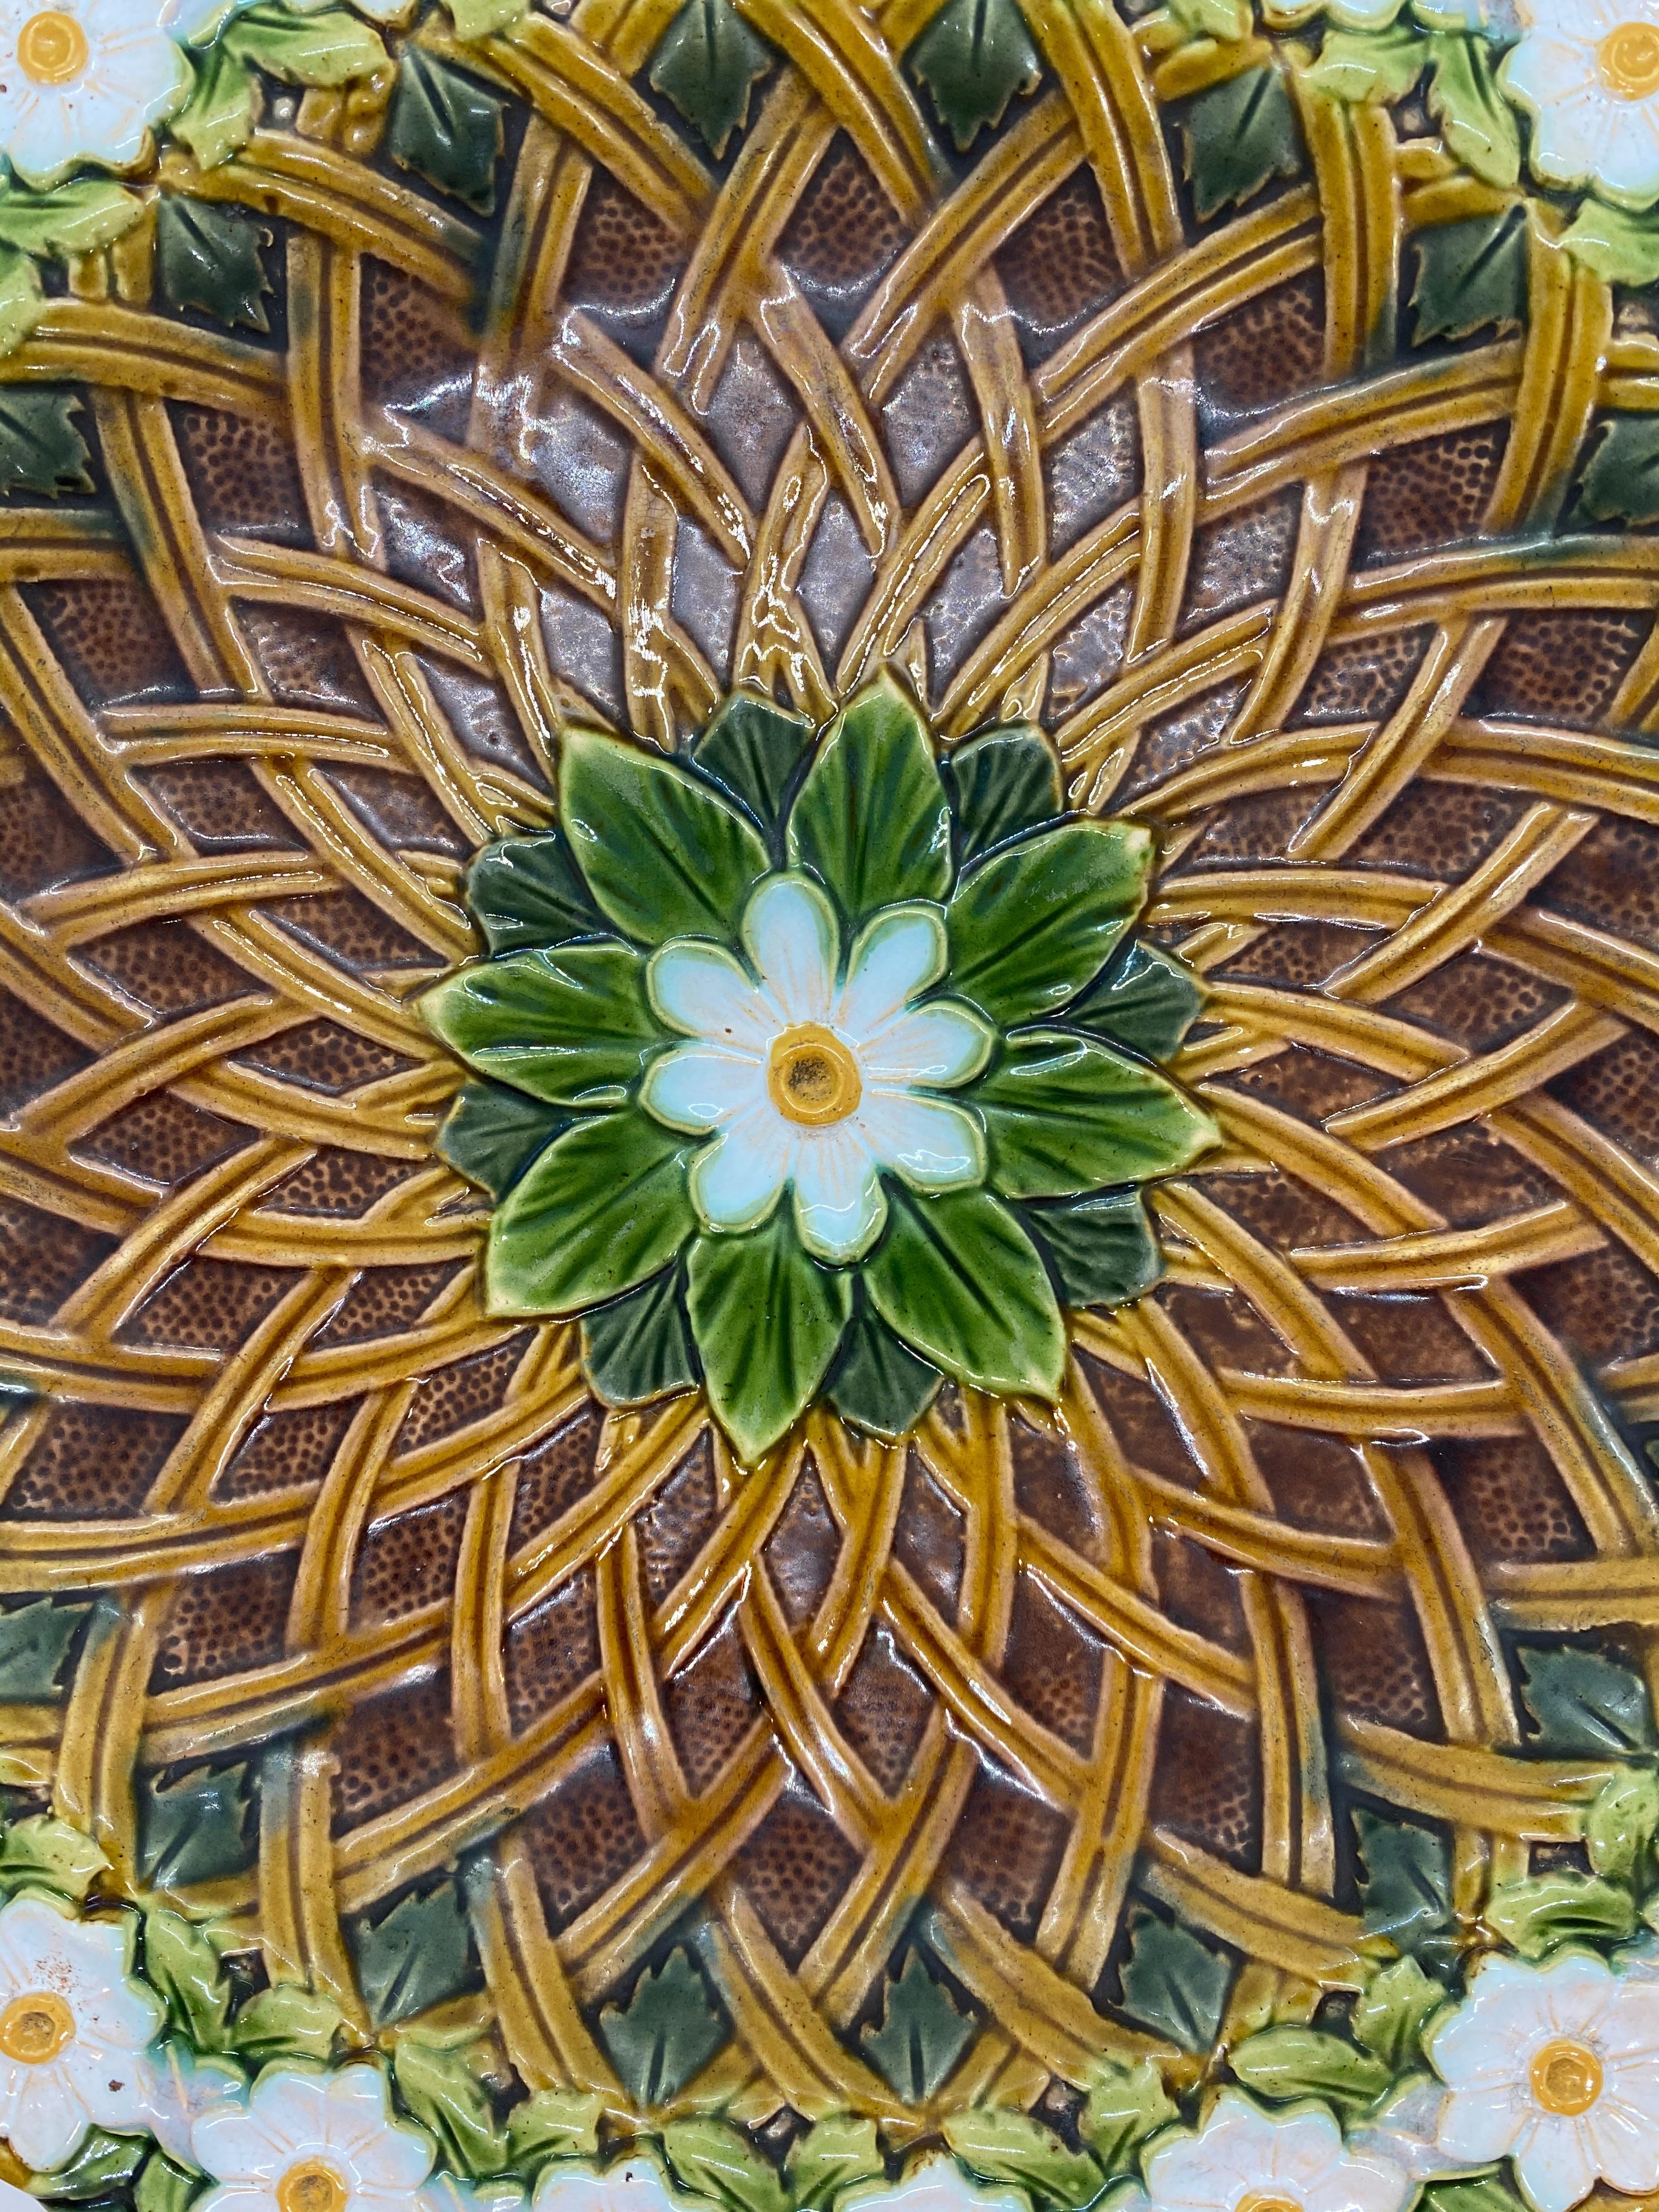 Victorian Minton Majolica Platter with Lattice Work and Daisy Chain Border, Dated 1880 For Sale